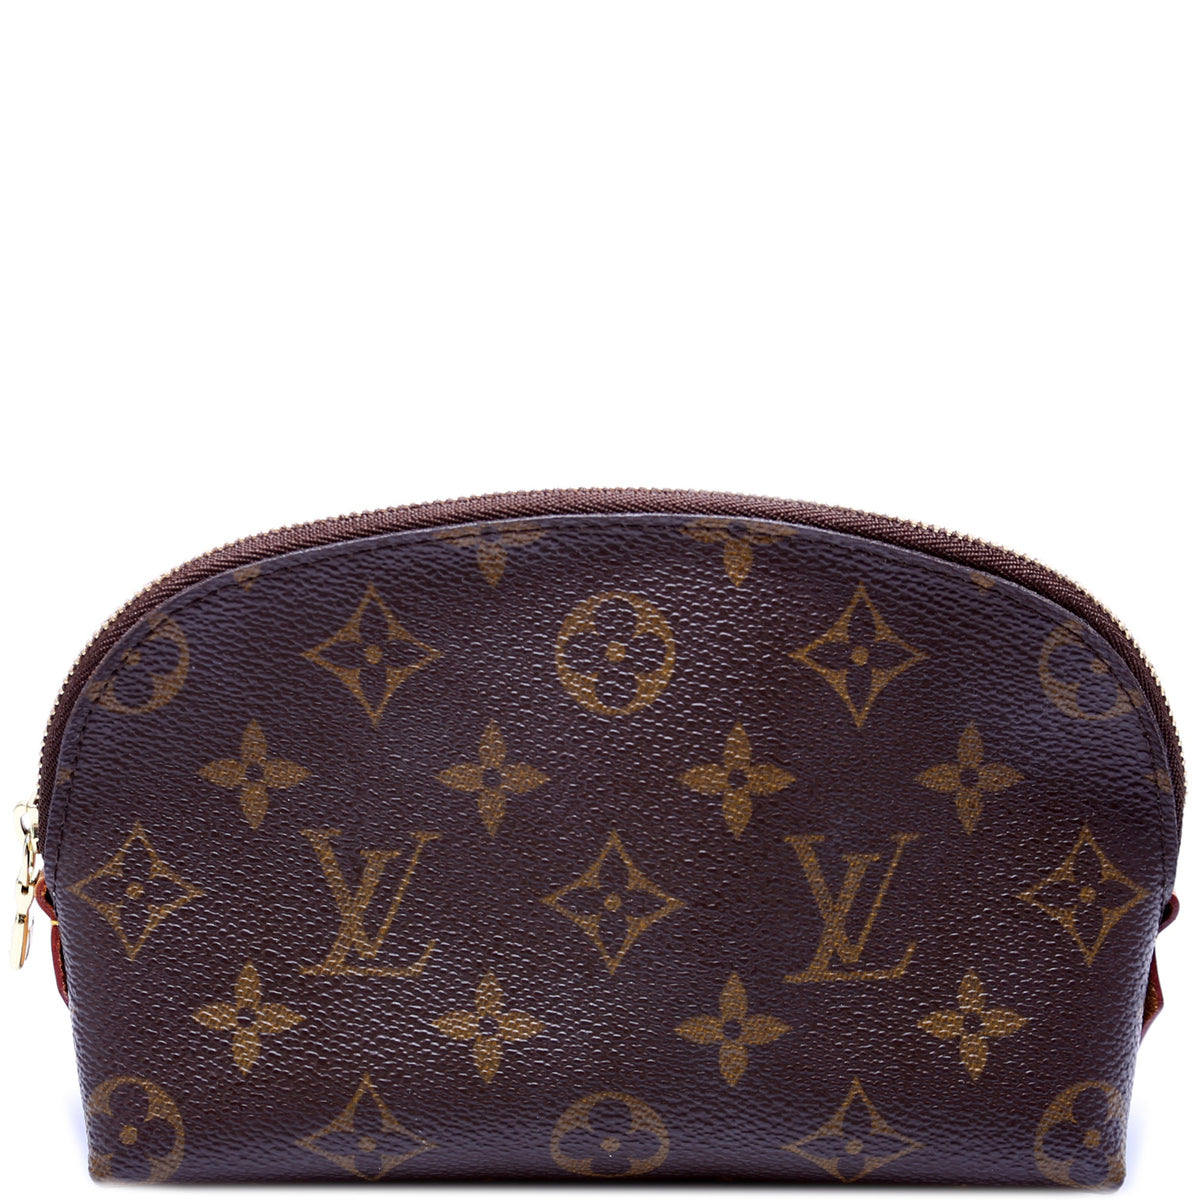 1 year review - Louis Vuitton Cosmetic Pouch GM 